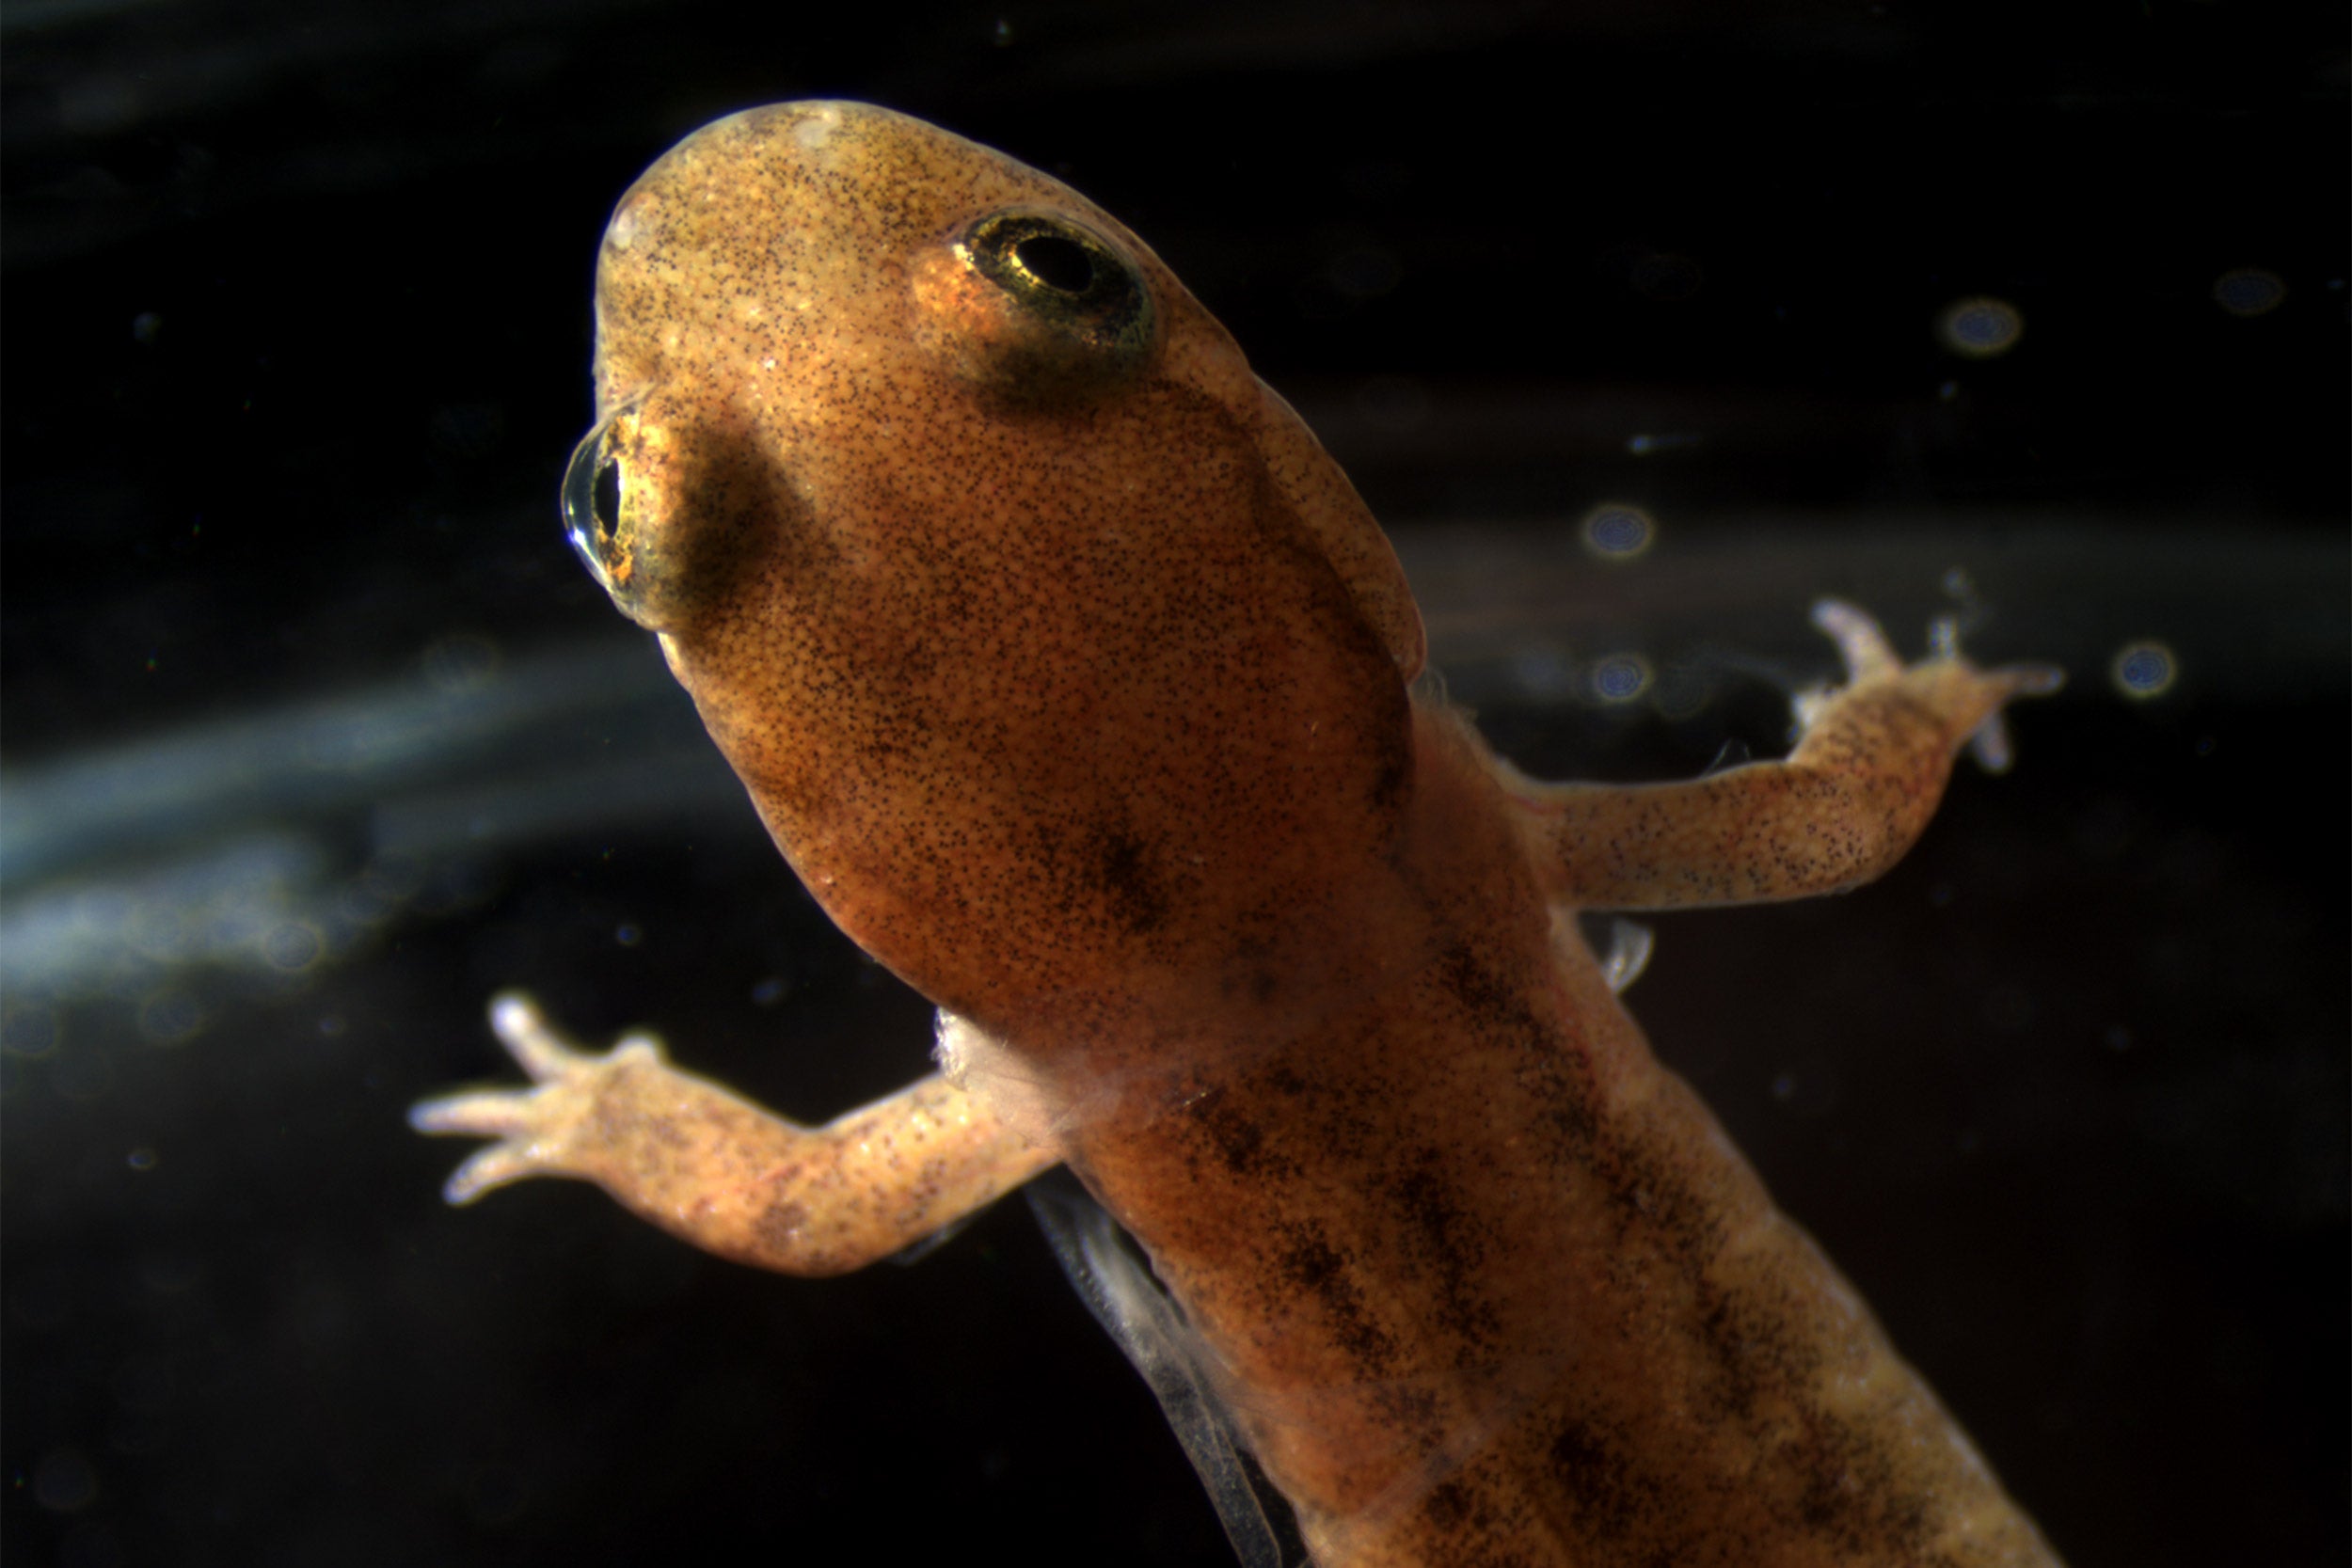 Desmognathus fuscus. That is one of the lungless salamanders featured in the study